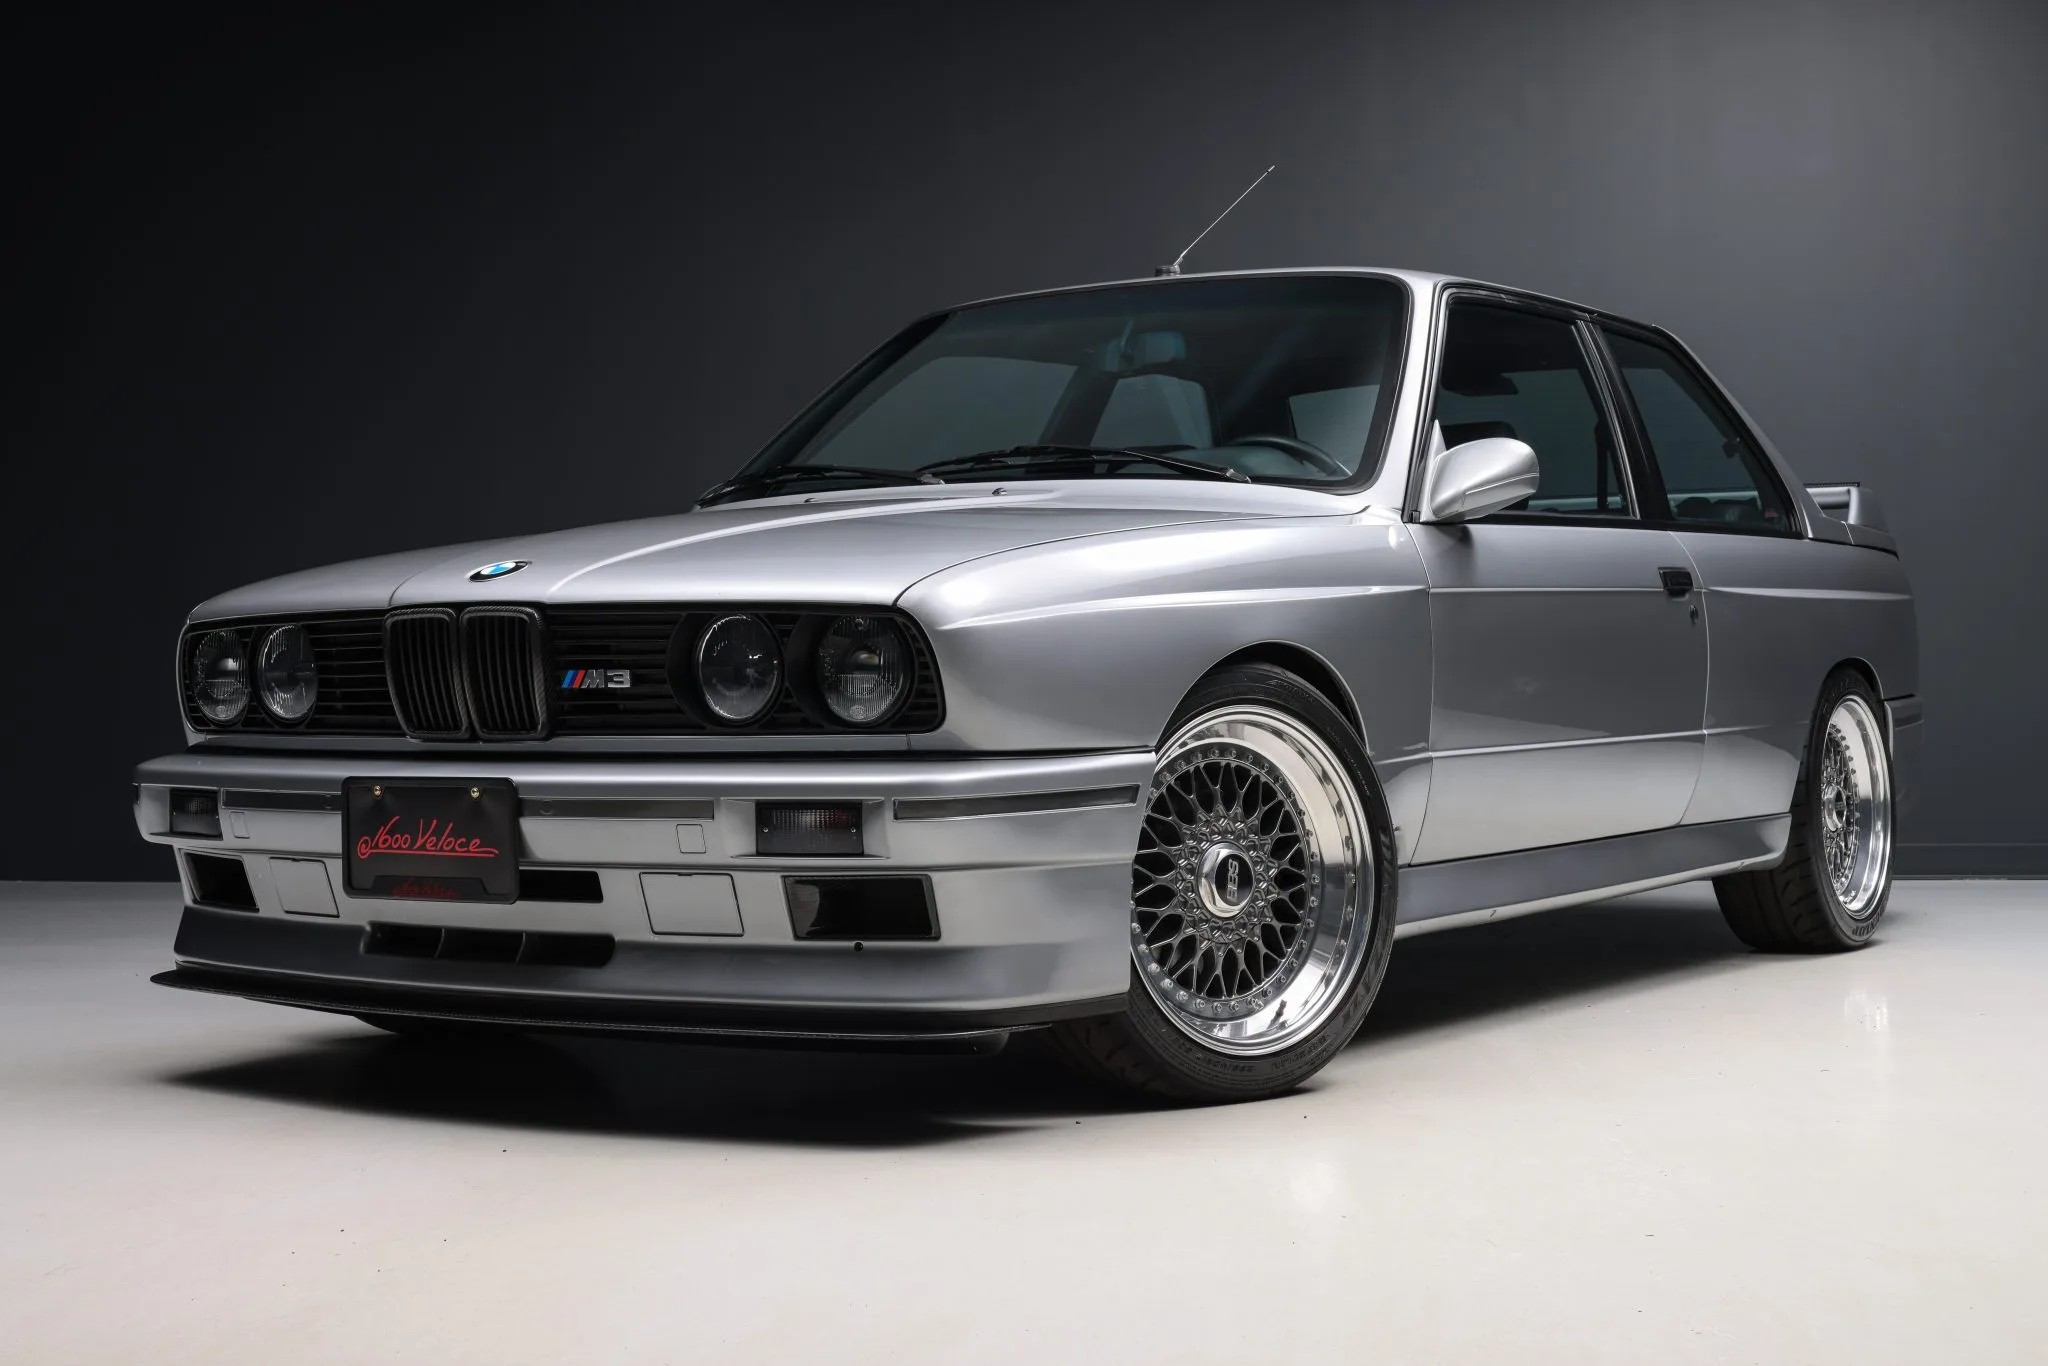 https://s1.cdn.autoevolution.com/images/news/this-1988-bmw-e30-m3-is-here-to-haunt-your-touring-car-dreams-212612_1.jpg